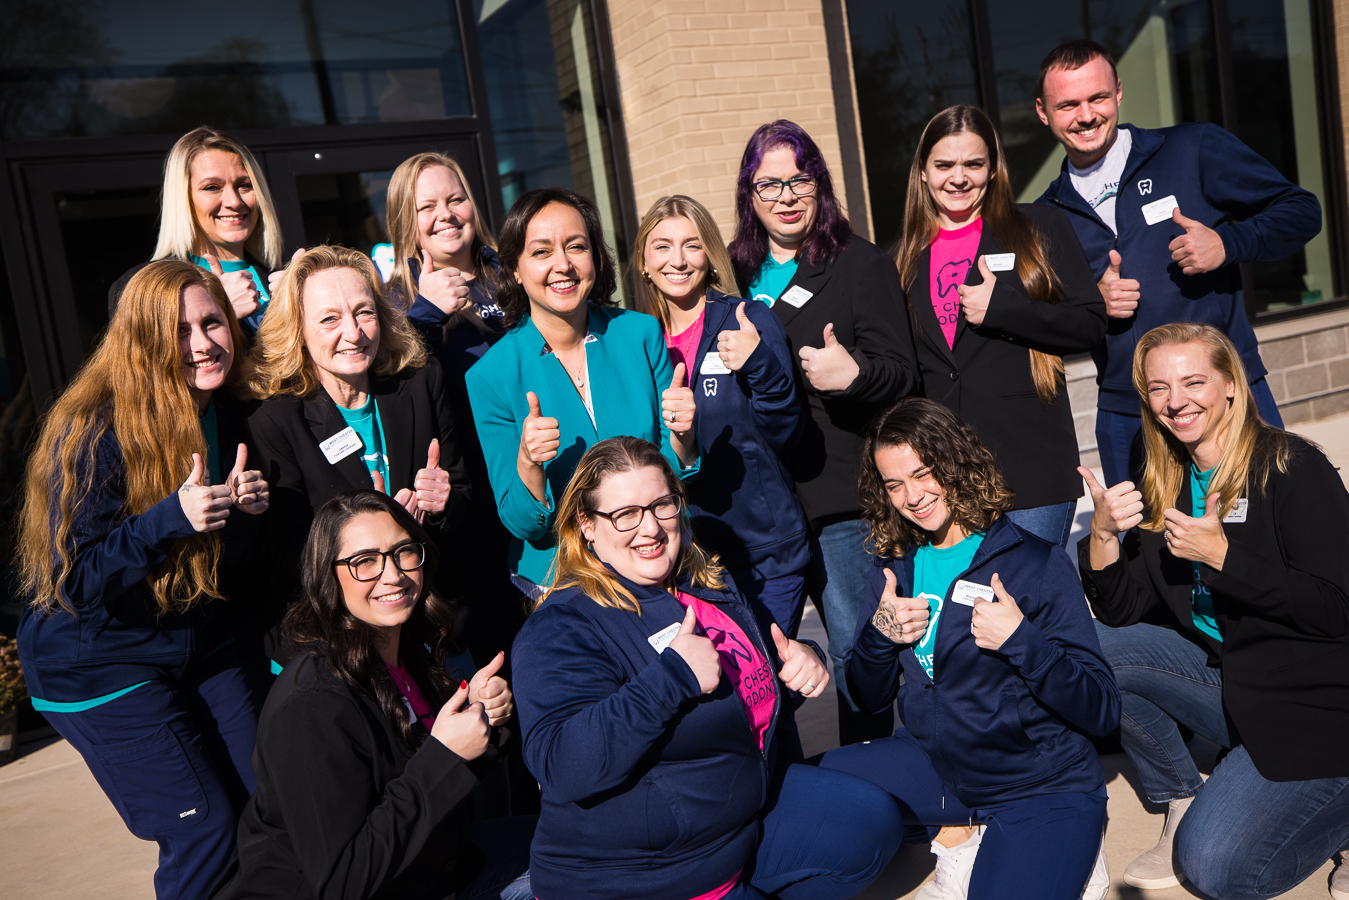 lisa rhinehart, pa branding photographer, captures this image of the orthodontic staff as they huddle together outside of their newly renovated building as put their thumbs up at the camera 